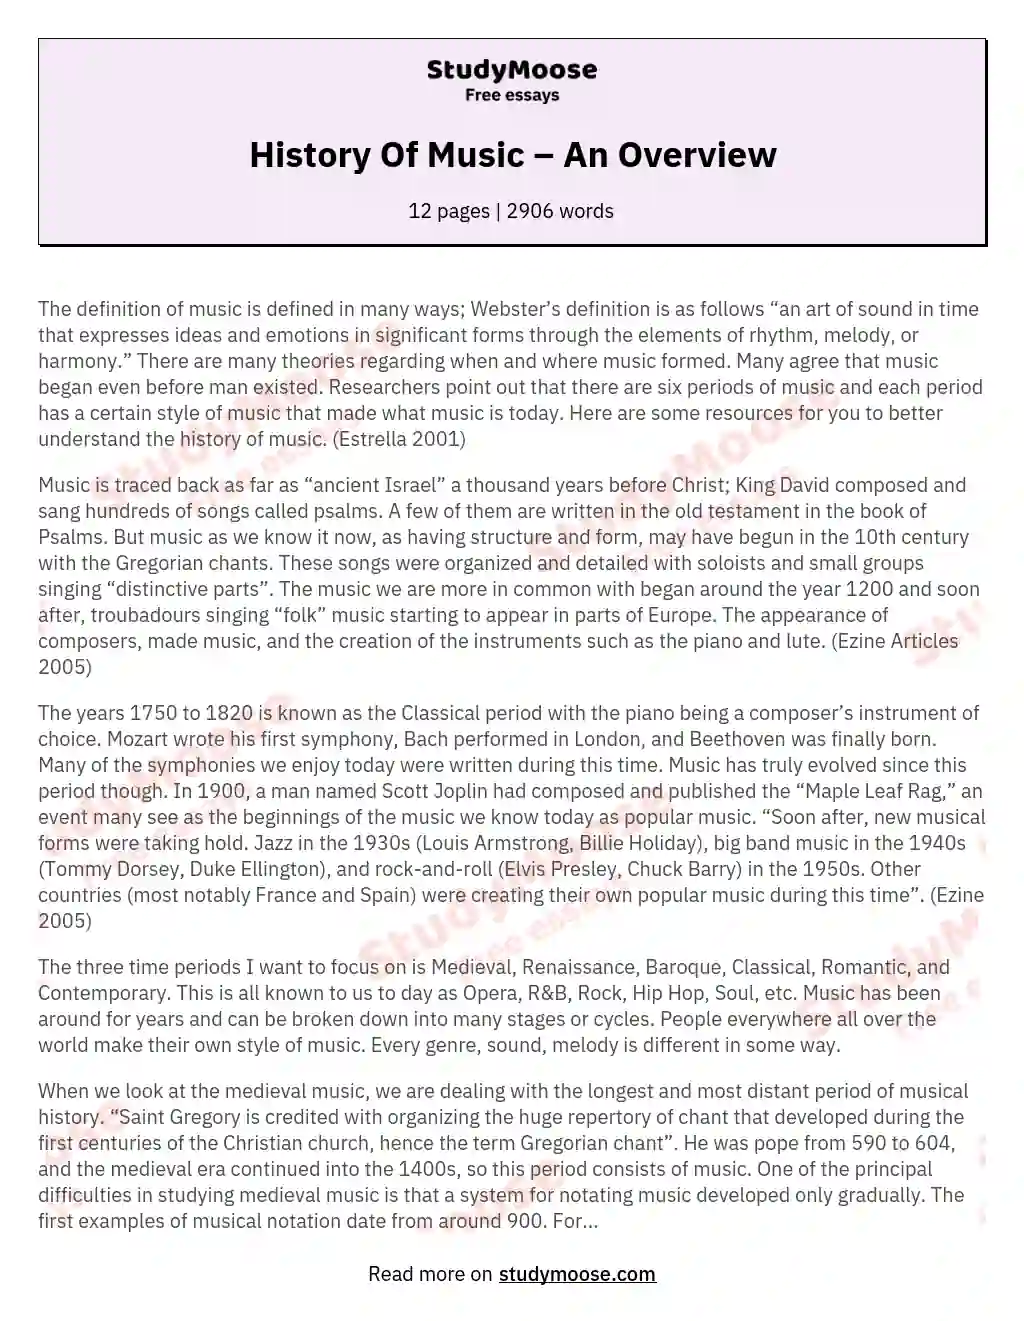 History Of Music – An Overview essay